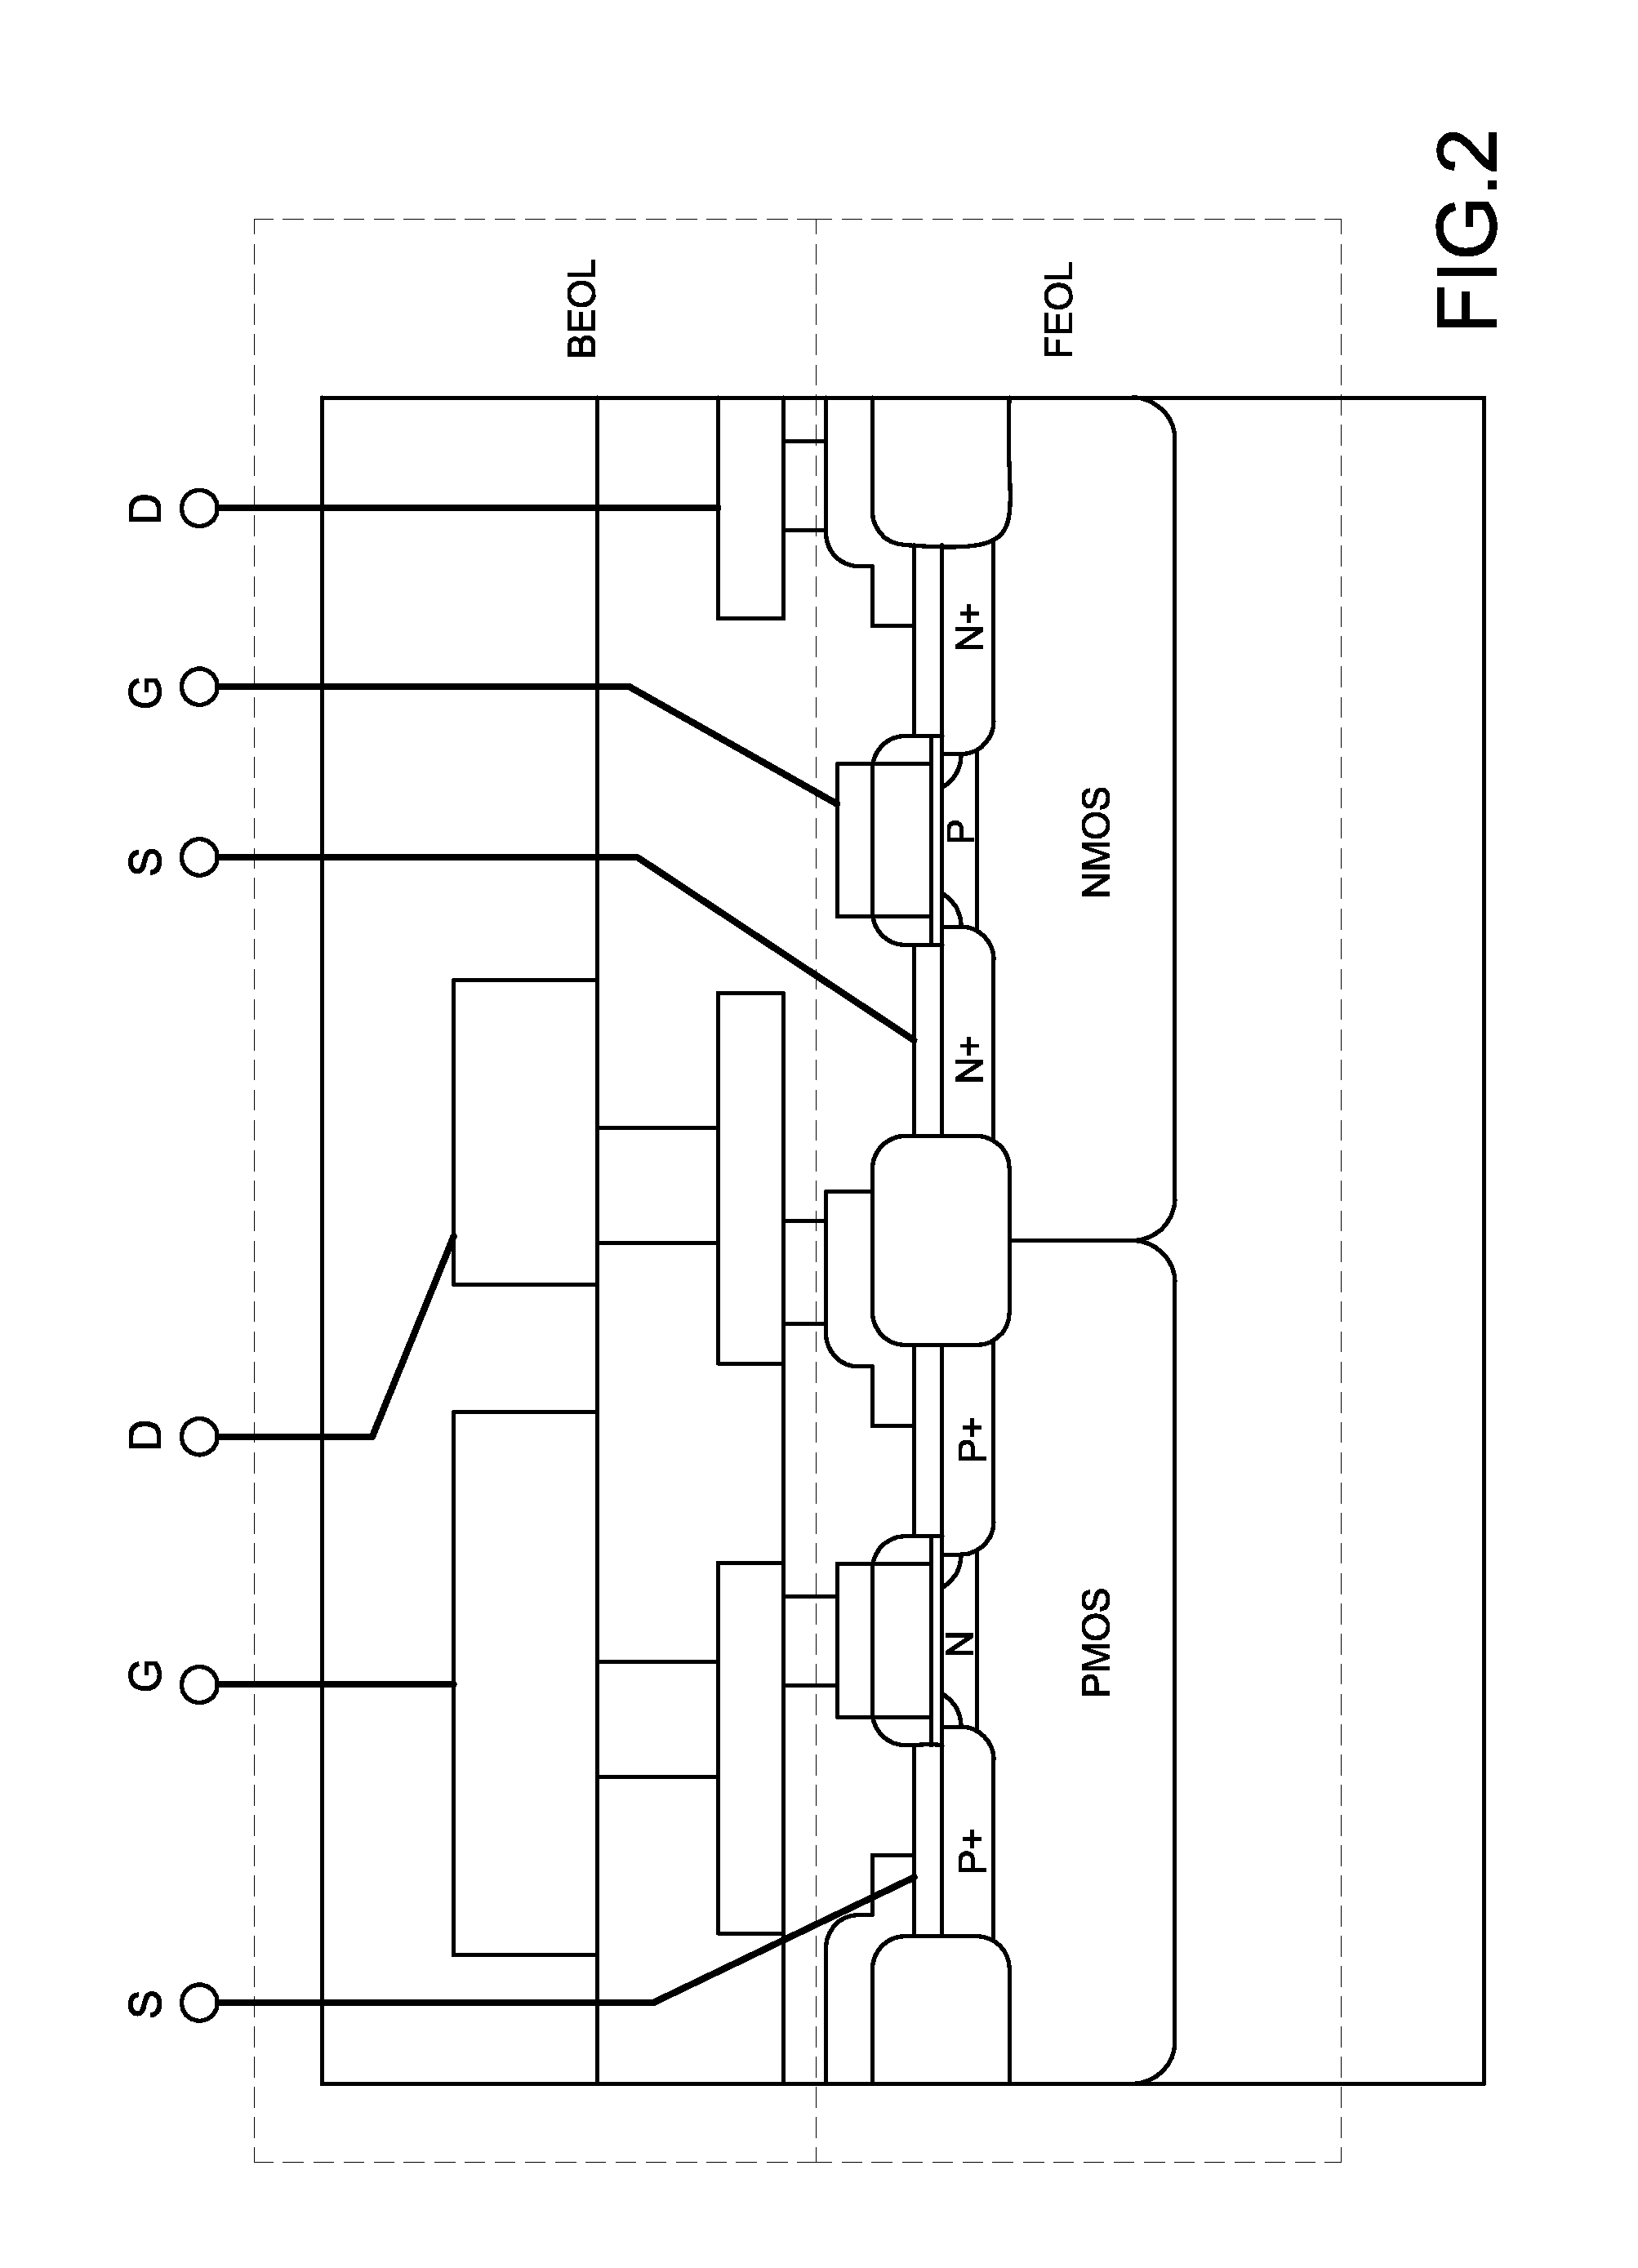 Electrical switch using gated resistor structures and three-dimensional integrated circuits using the same